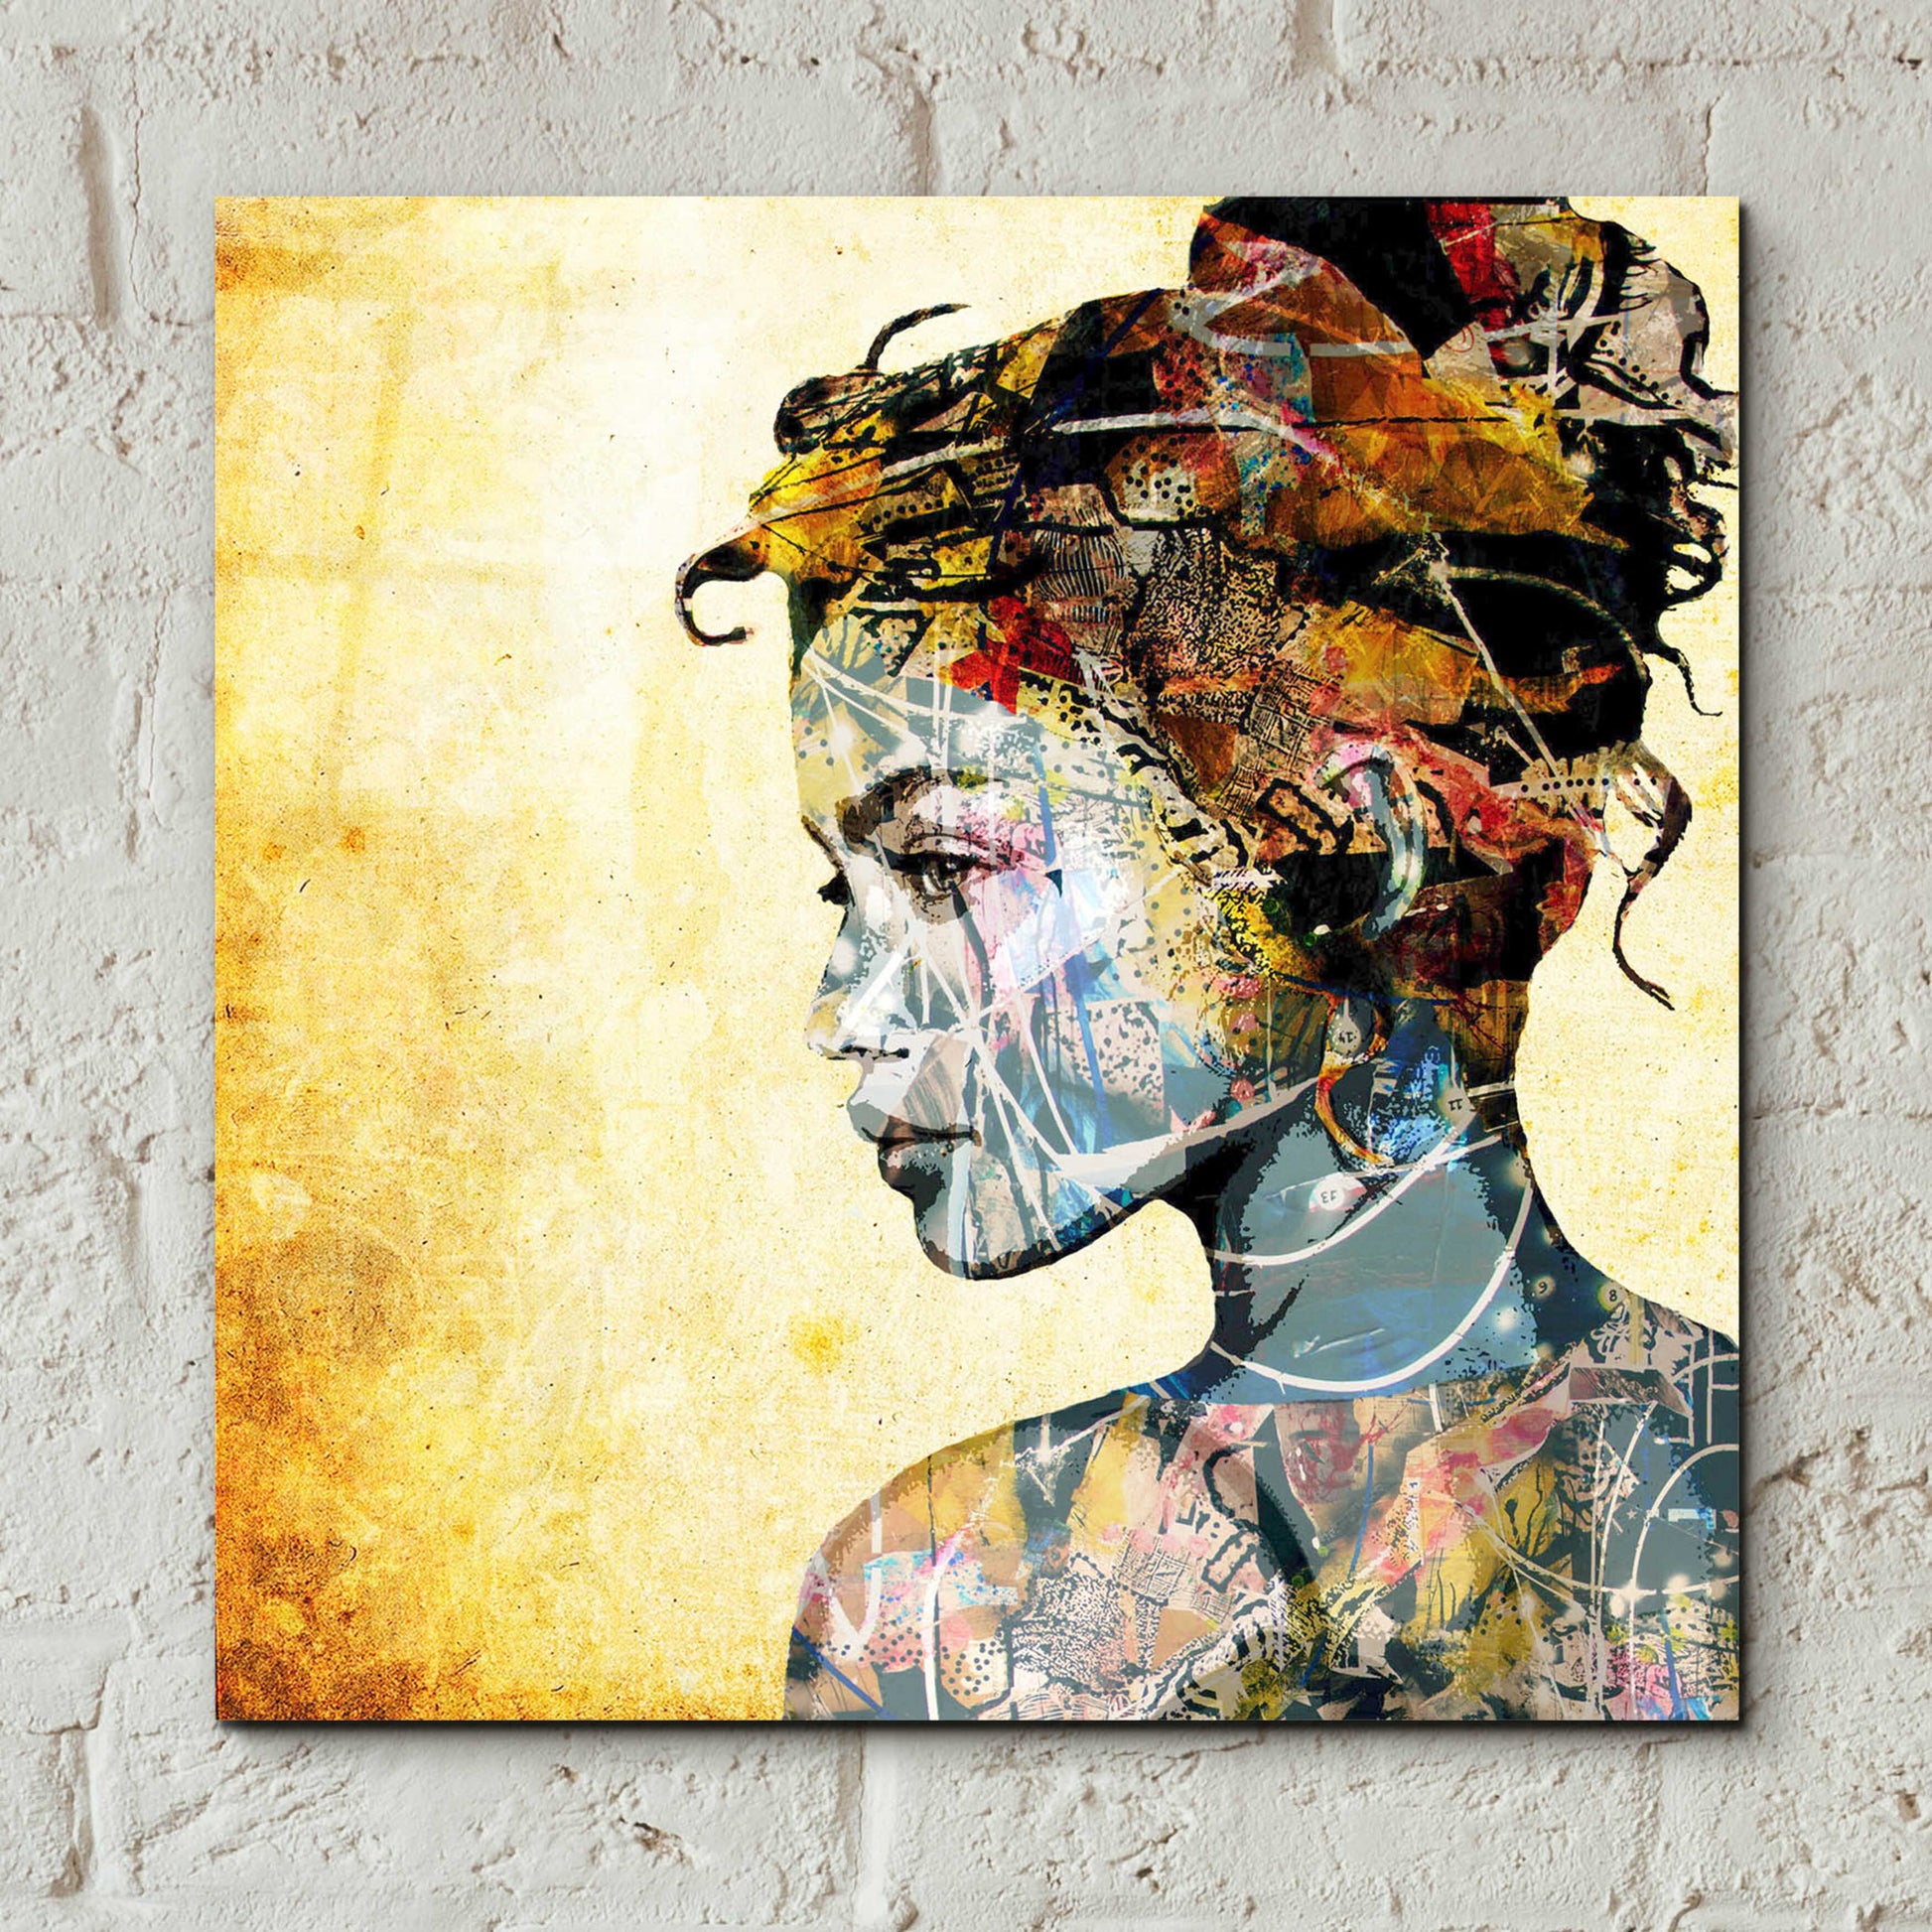 Epic Art 'THE GIFTED GIRL' by DB Waterman,12x12